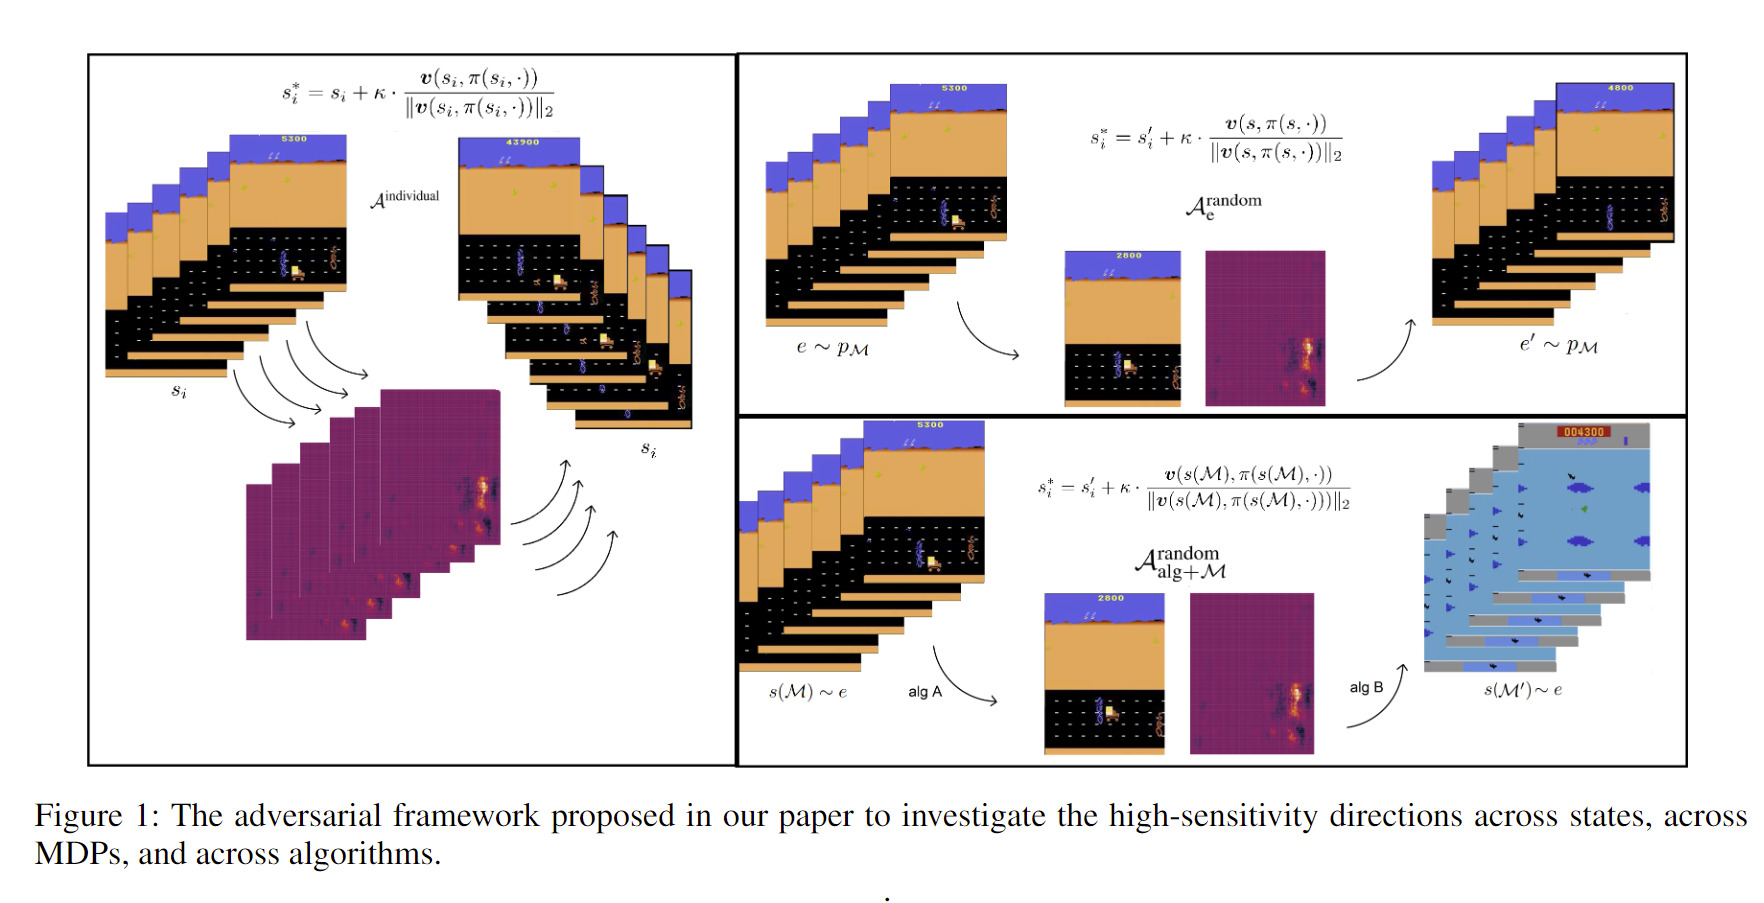 Figure 1: The adversarial framework proposed in our paper to investigate the high-sensitivity directions across statesm across MDPs, and across algorithms